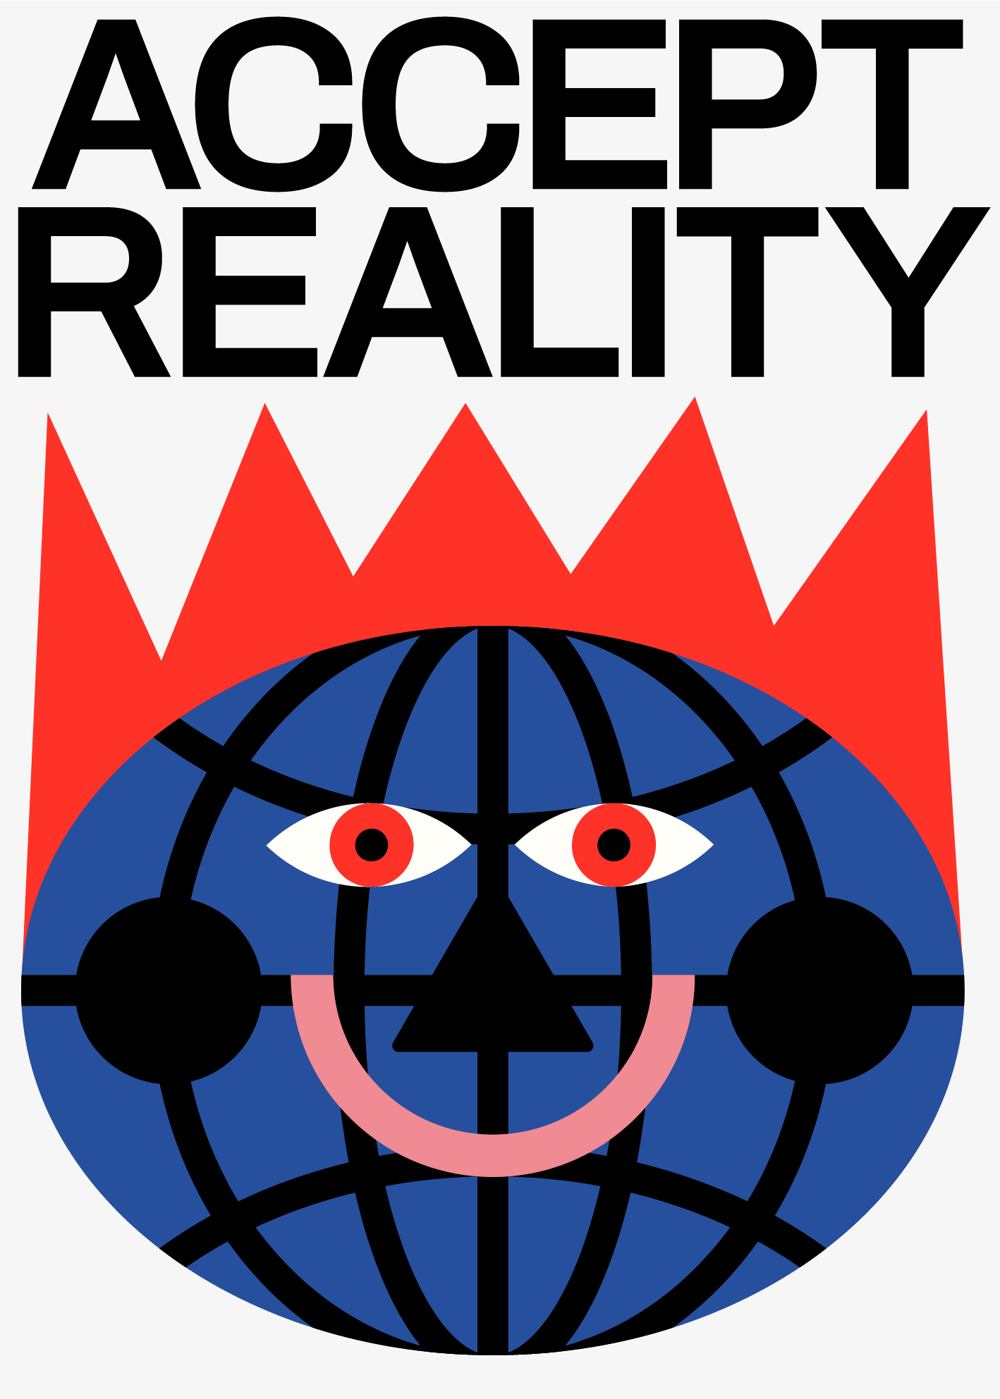 ACCEPT REALITY Poster by Marco Oggian